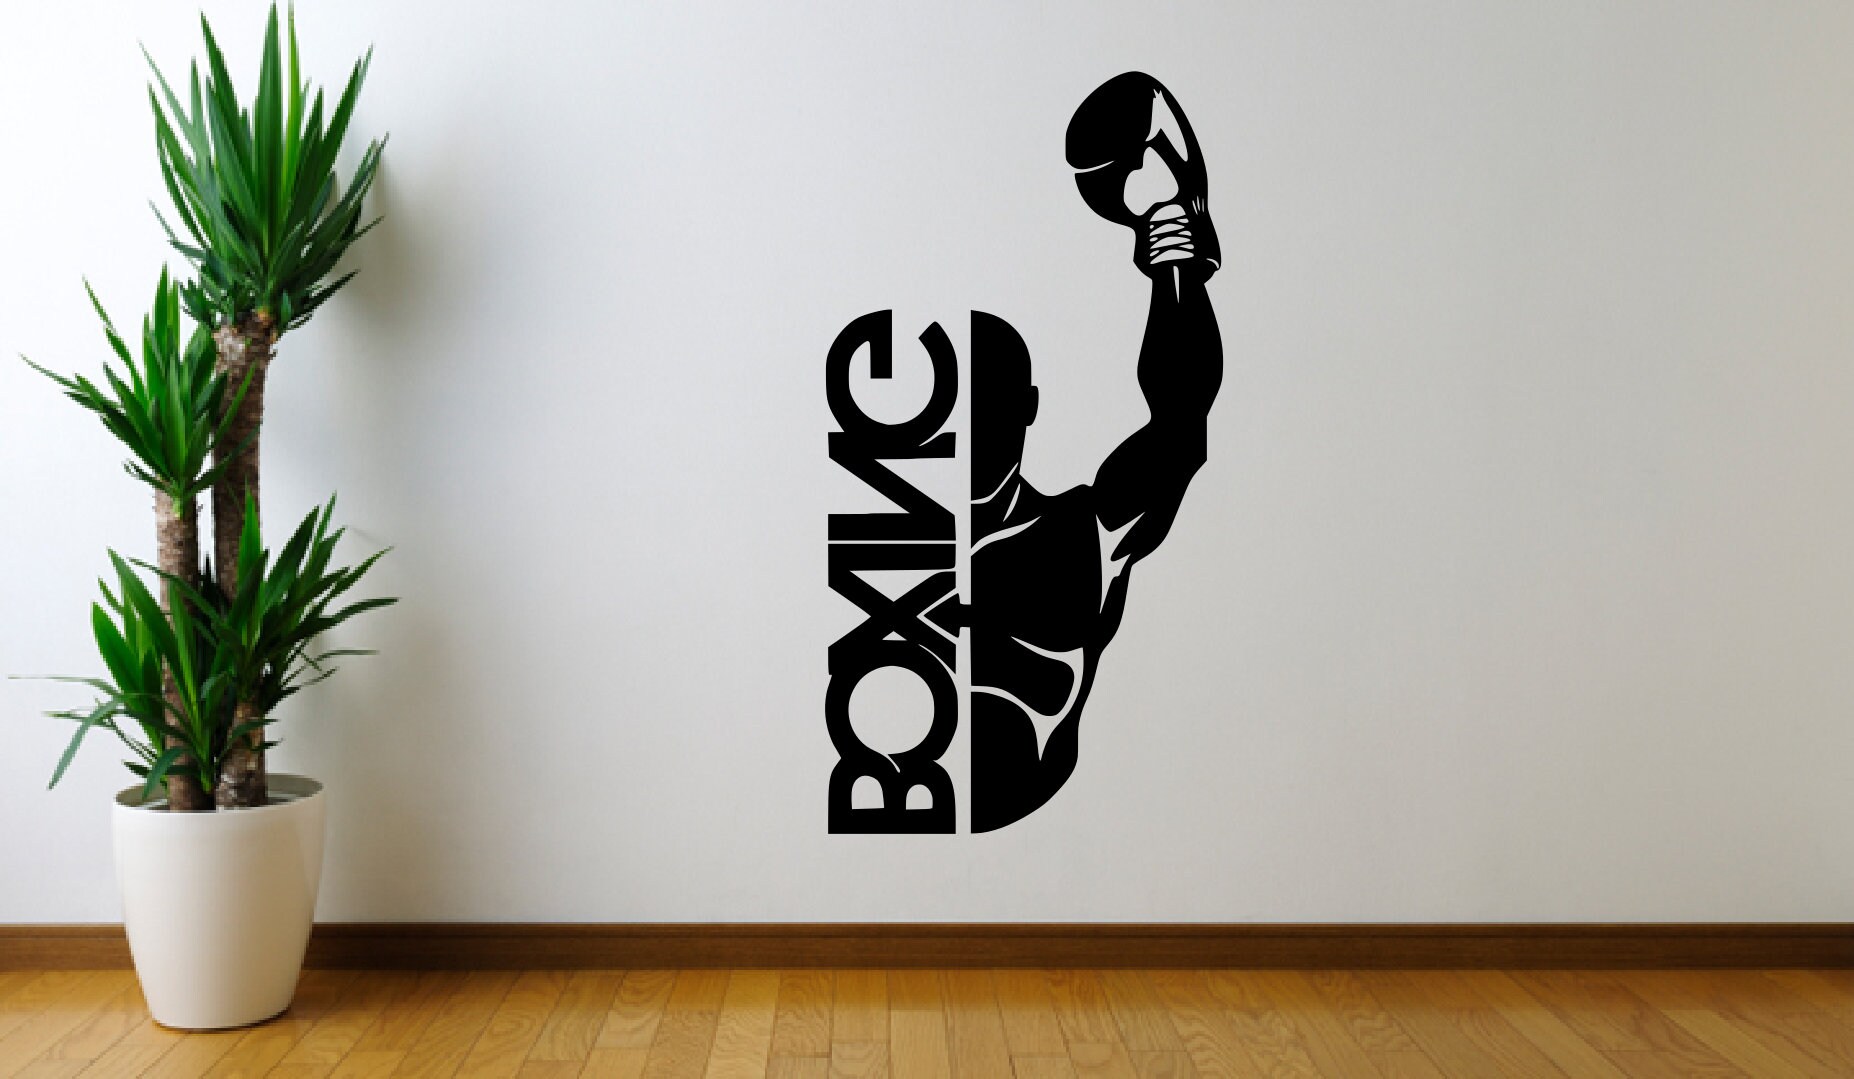 Boxing Boxer Training Wall Decal Sticker Mural Home Office Bedroom Decor  Sports BH4 -  Norway